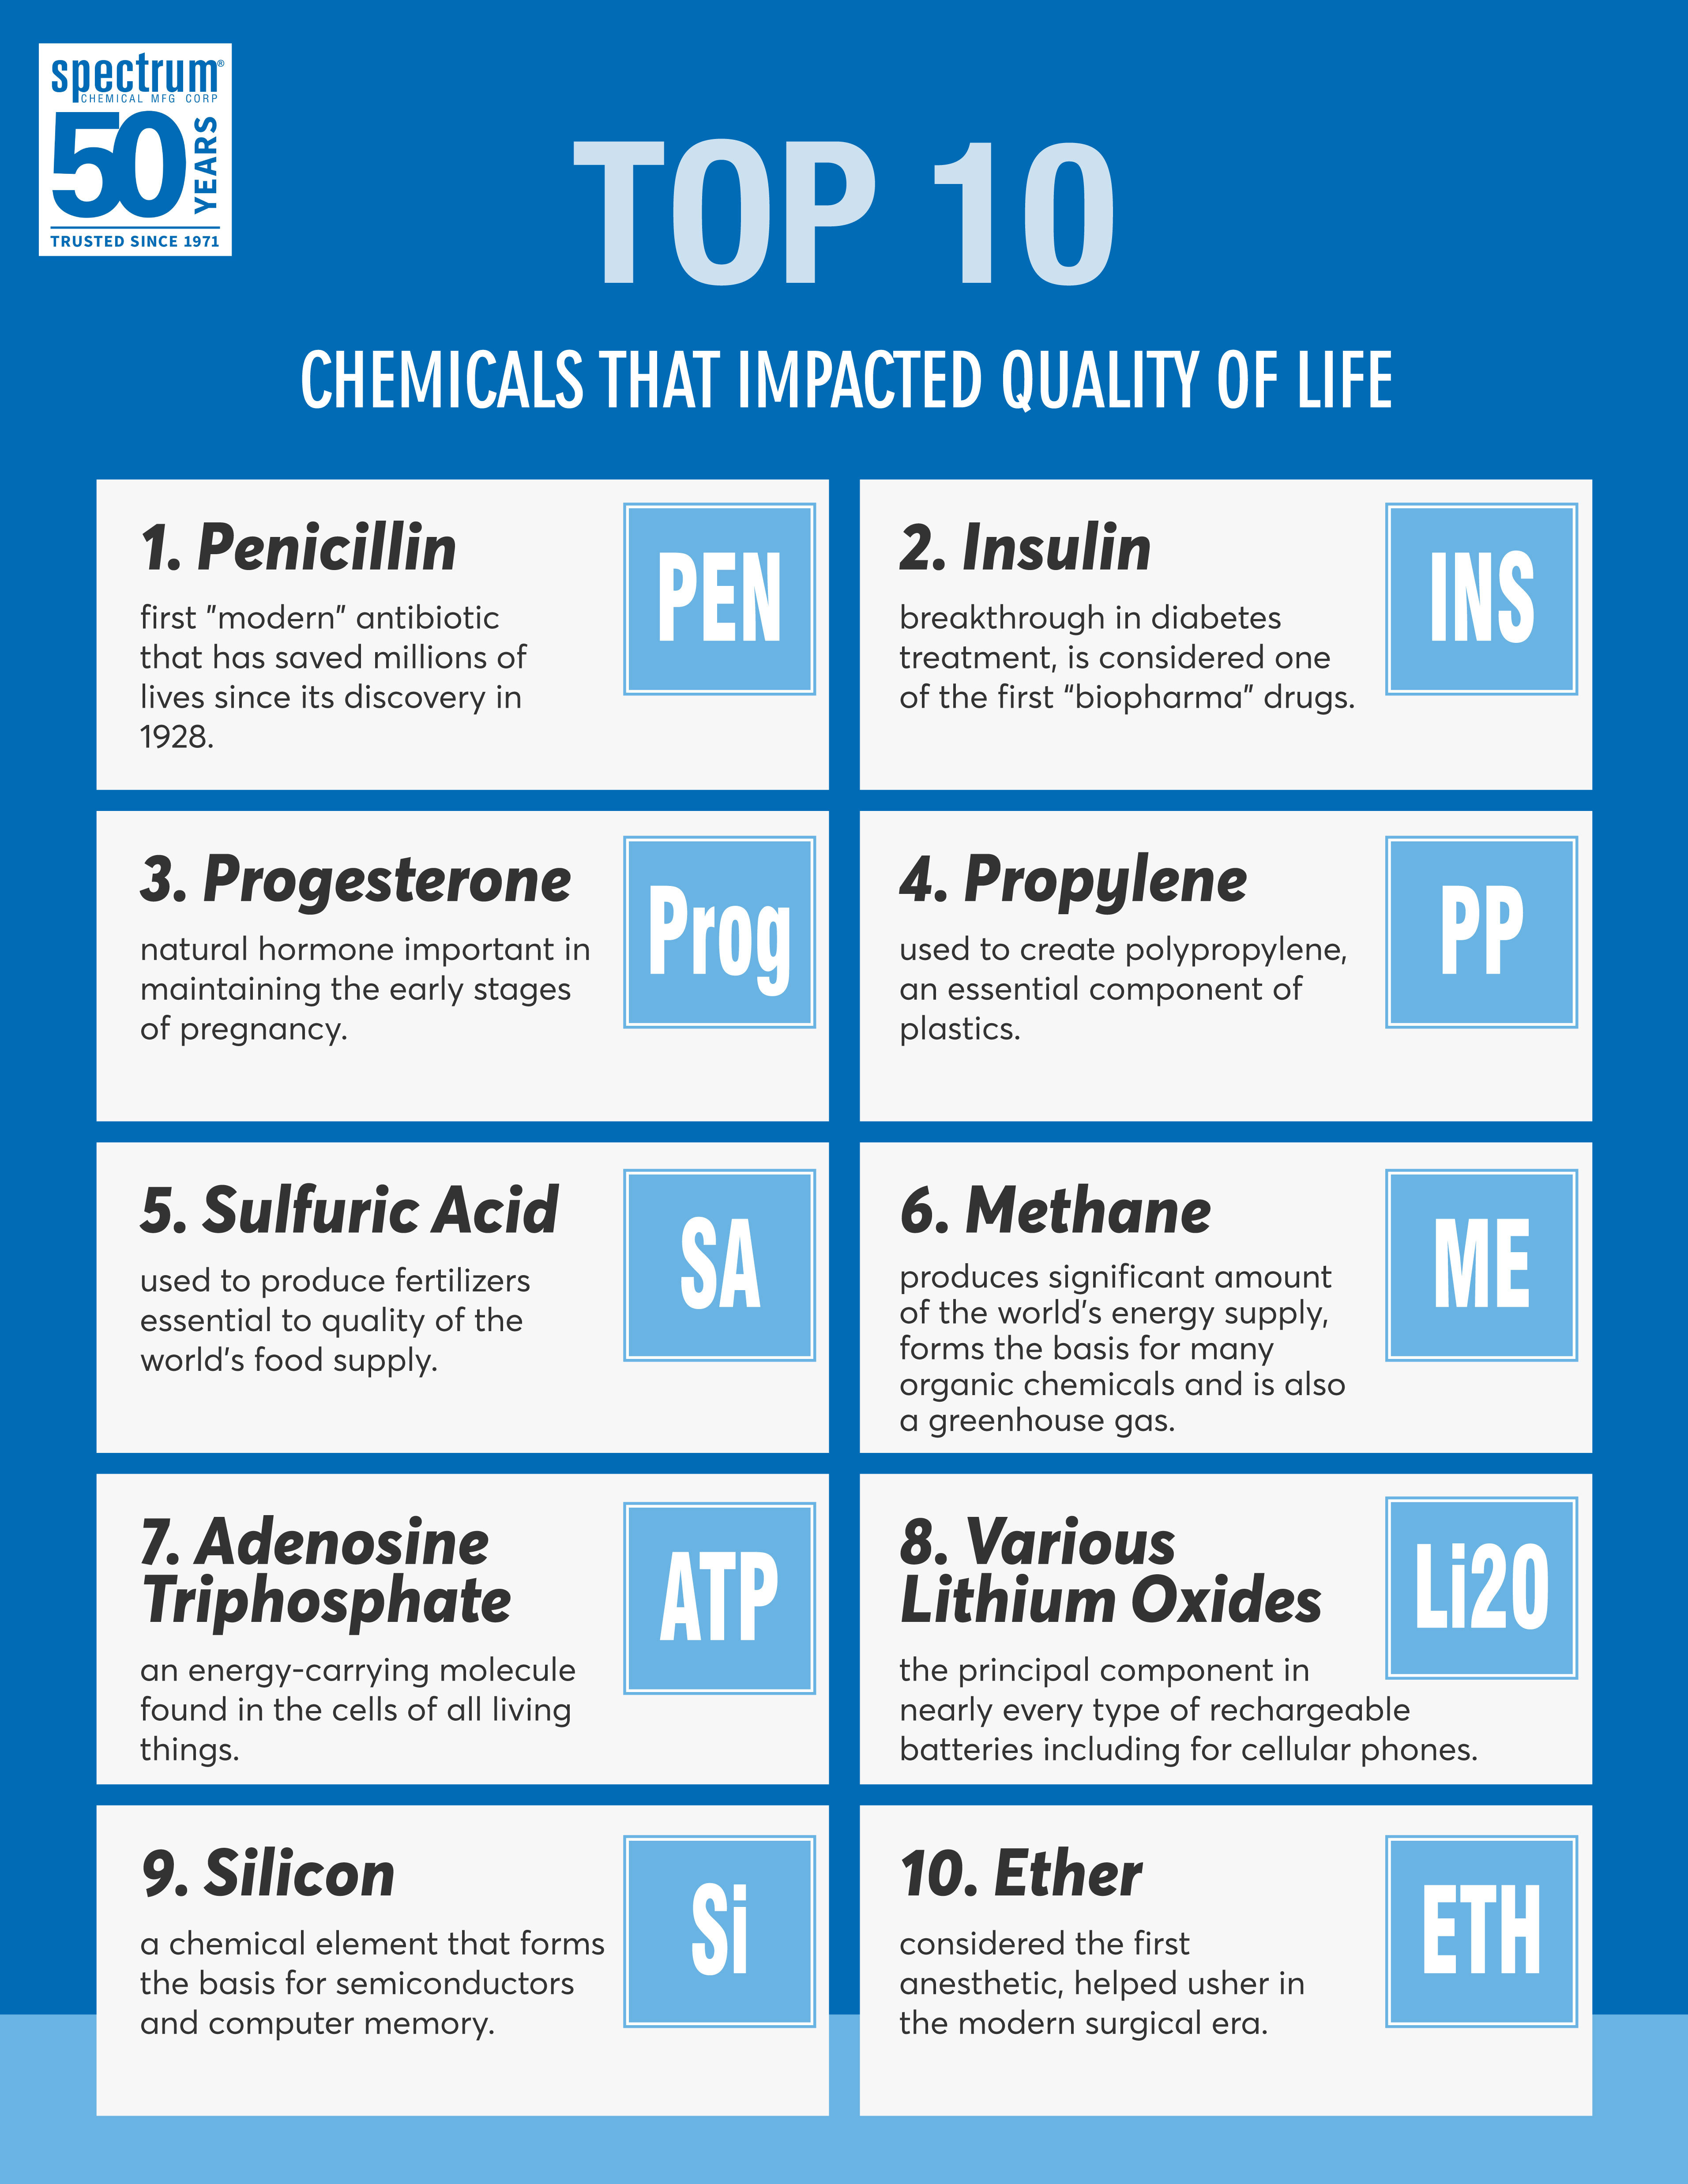 Spectrum_Chemical-Top_Ten_Chemicals_that_Impacted_Our_Quality_of_Life-2021-BW.jpg